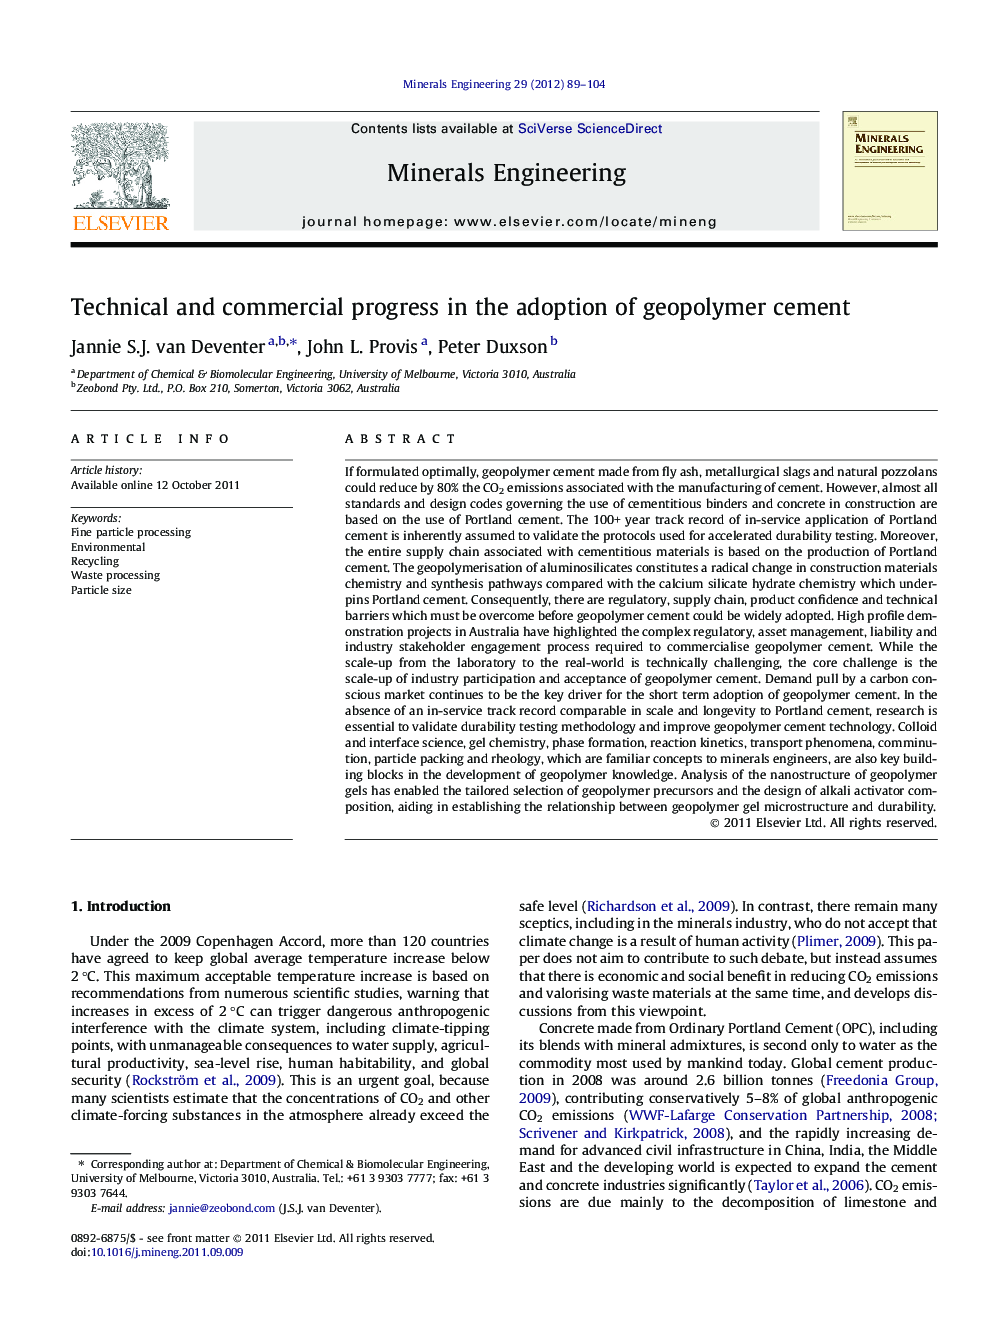 Technical and commercial progress in the adoption of geopolymer cement